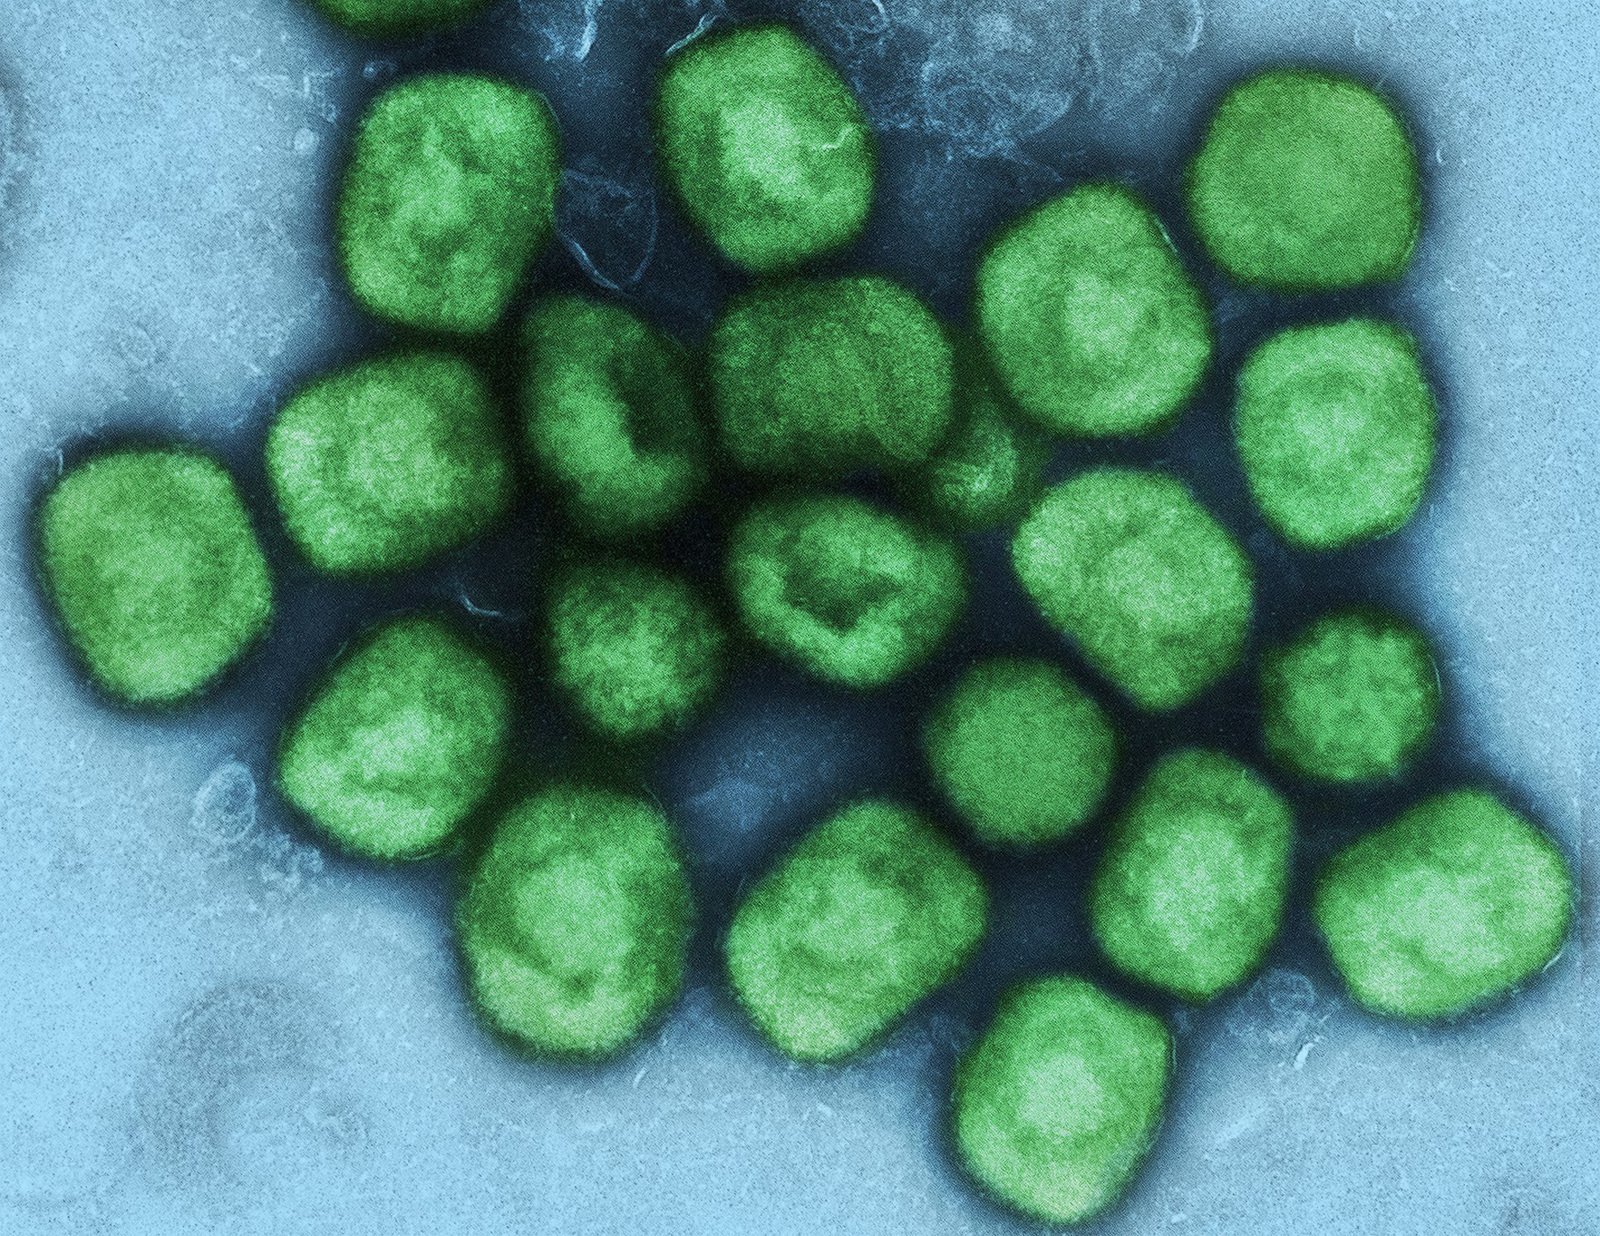 Colorized transmission electron micrograph of monkeypox virus particles green